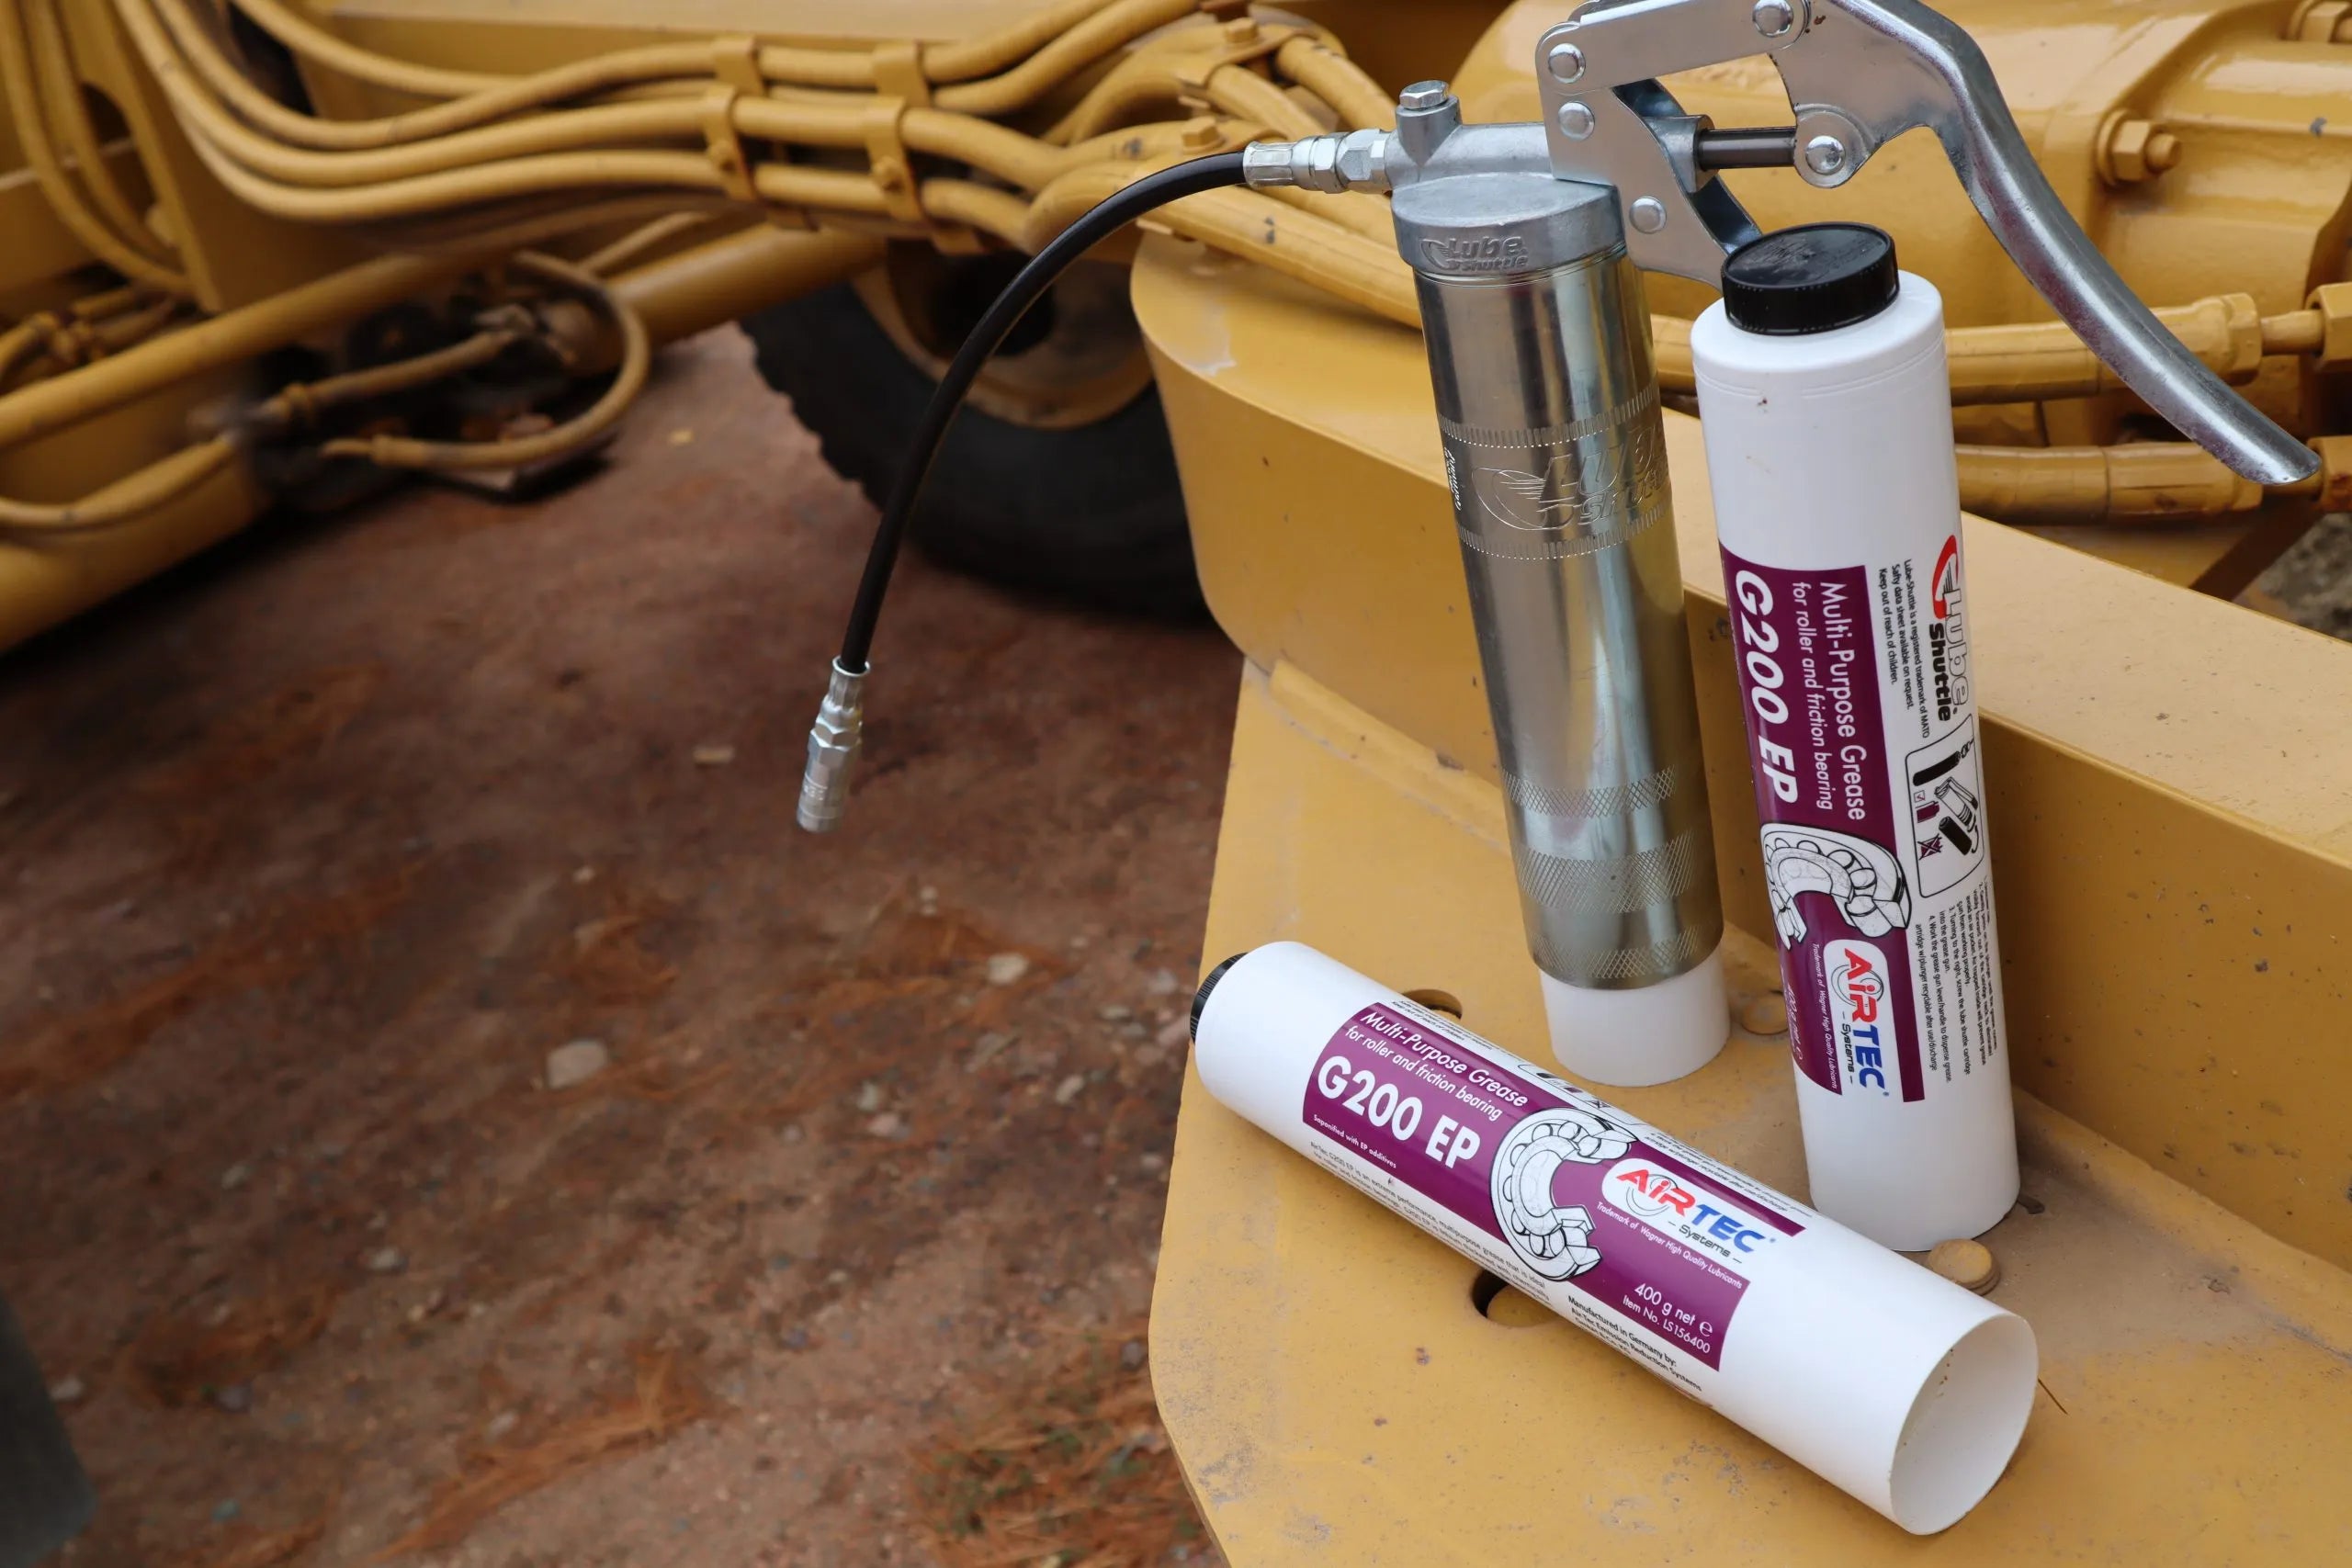 Two Multi-purpose Grease and a grease gun placed in the tractor